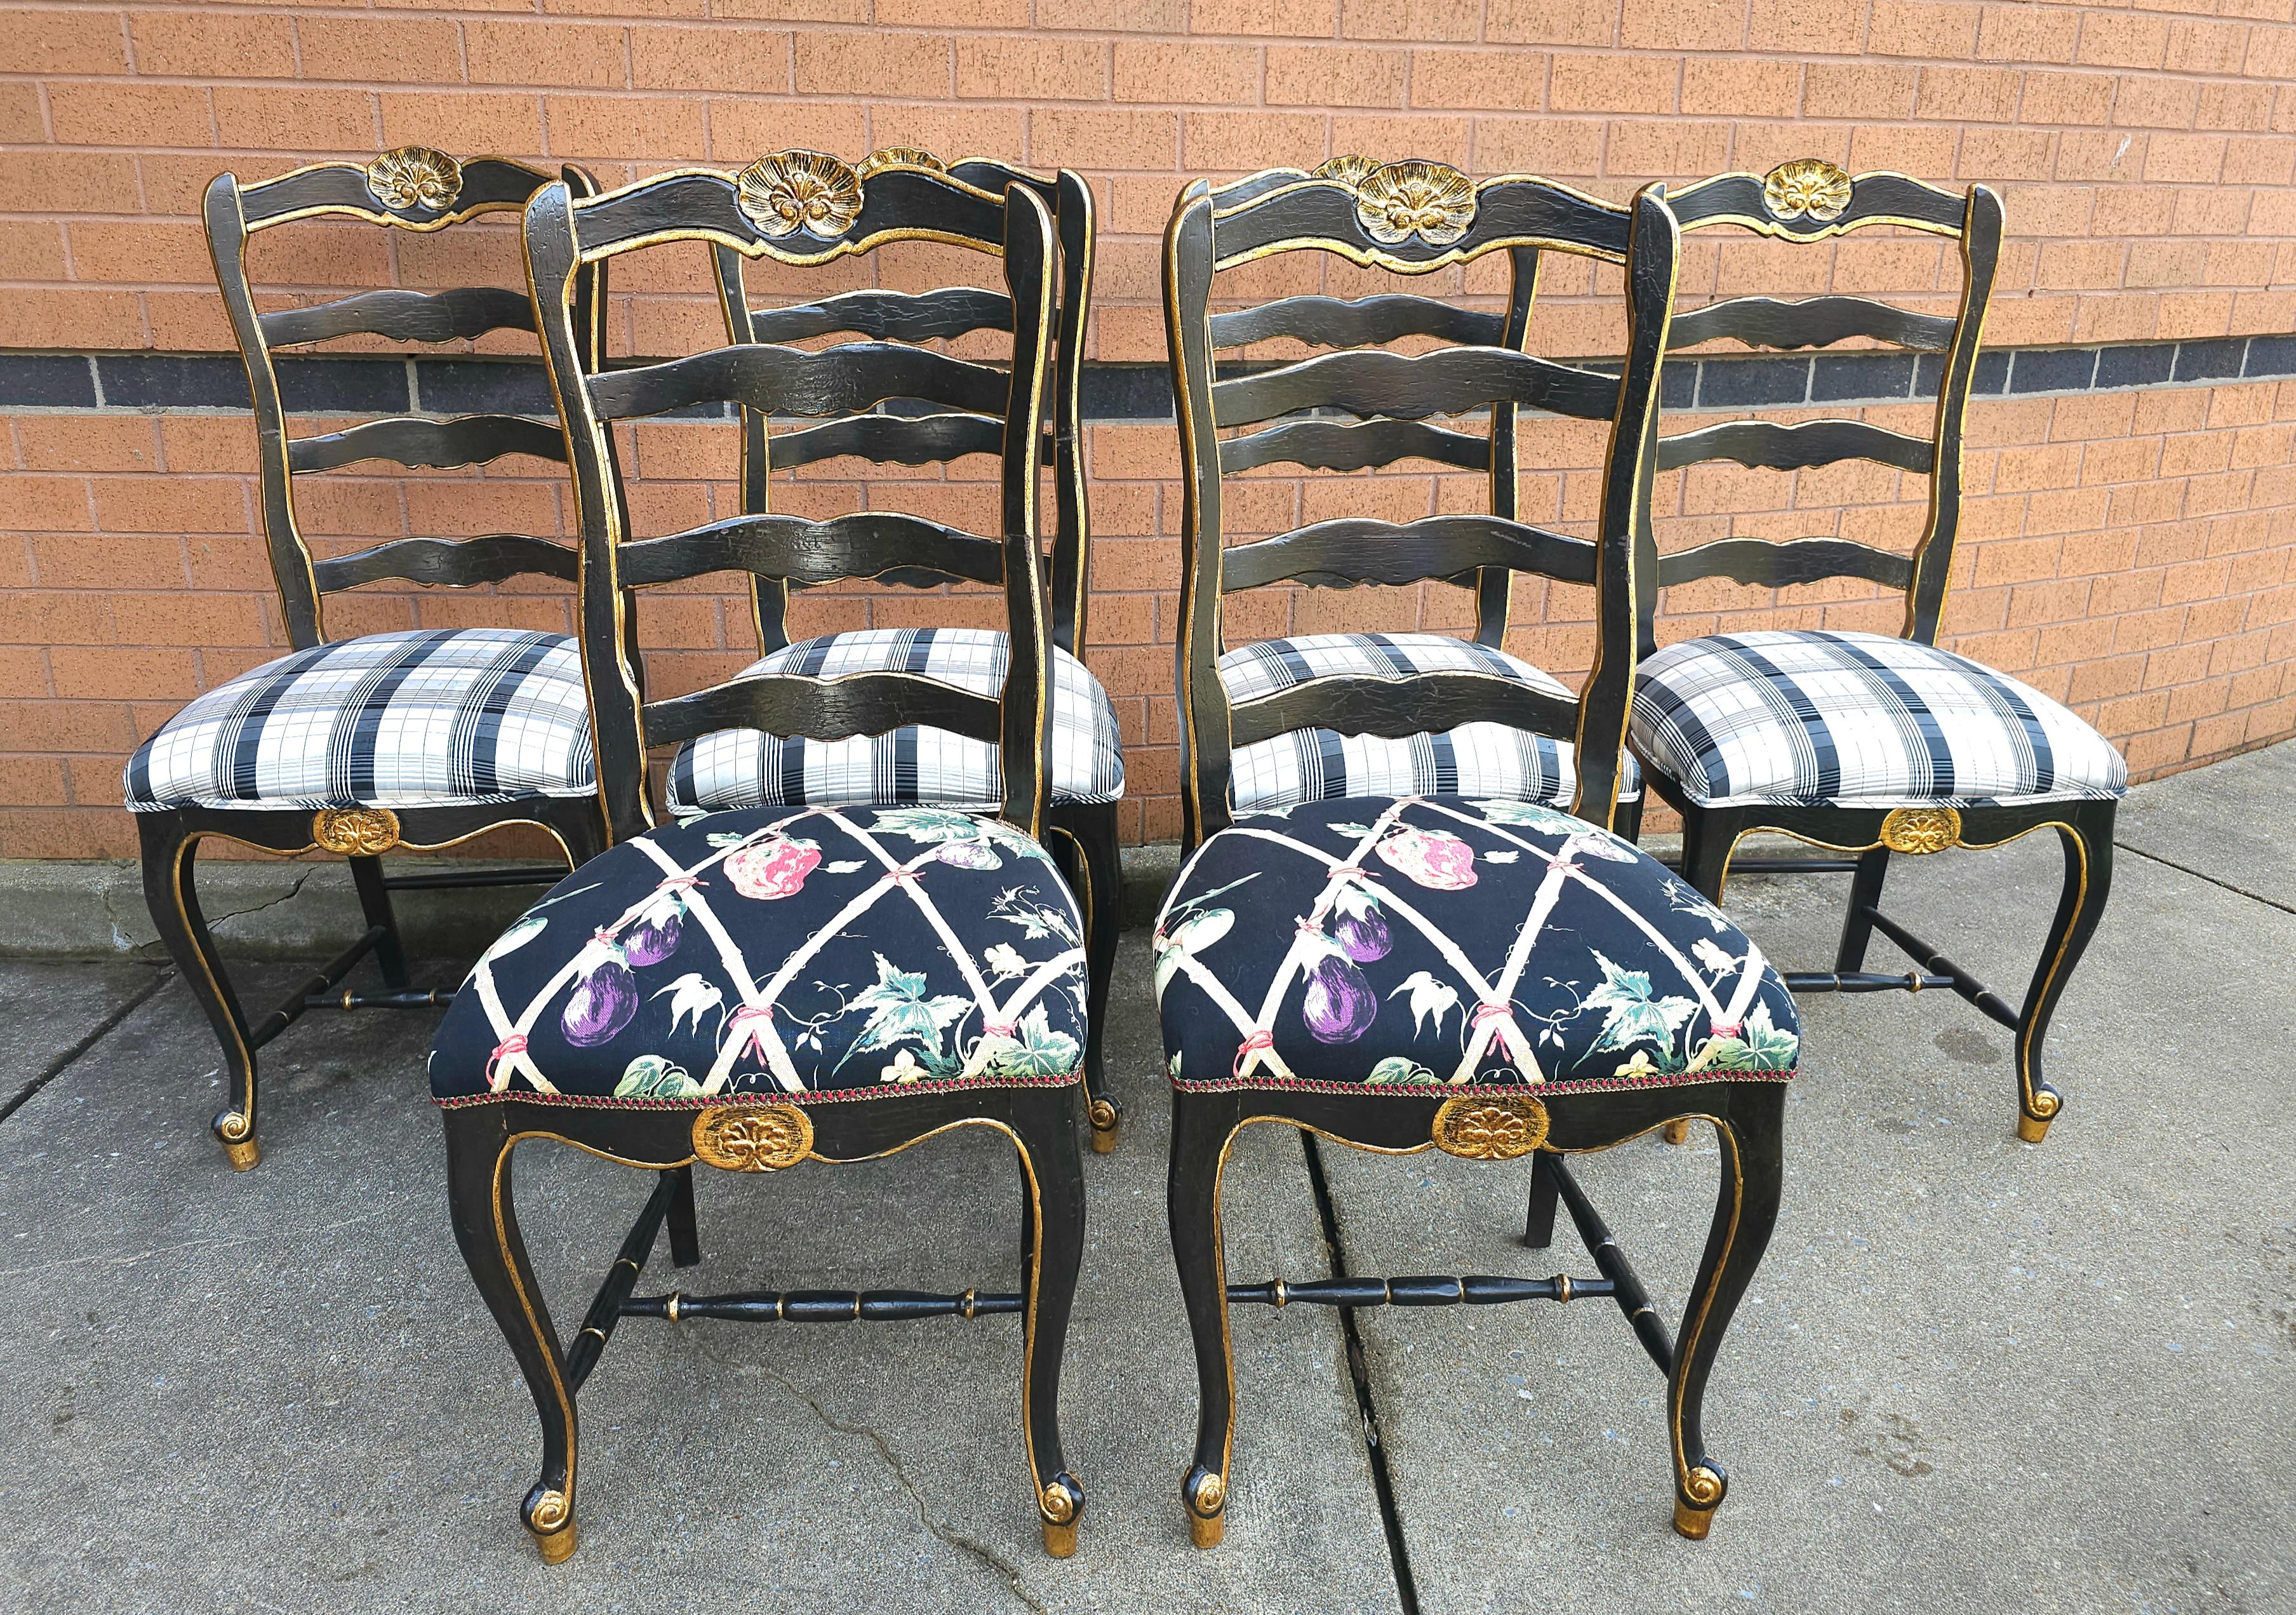 A magnificent Set of Six French Provinical style skillfully Partial Gilt And crackled Ebonized Slat Ladder high Back Side Chairs with Custom upholstery. 
 Measure 19